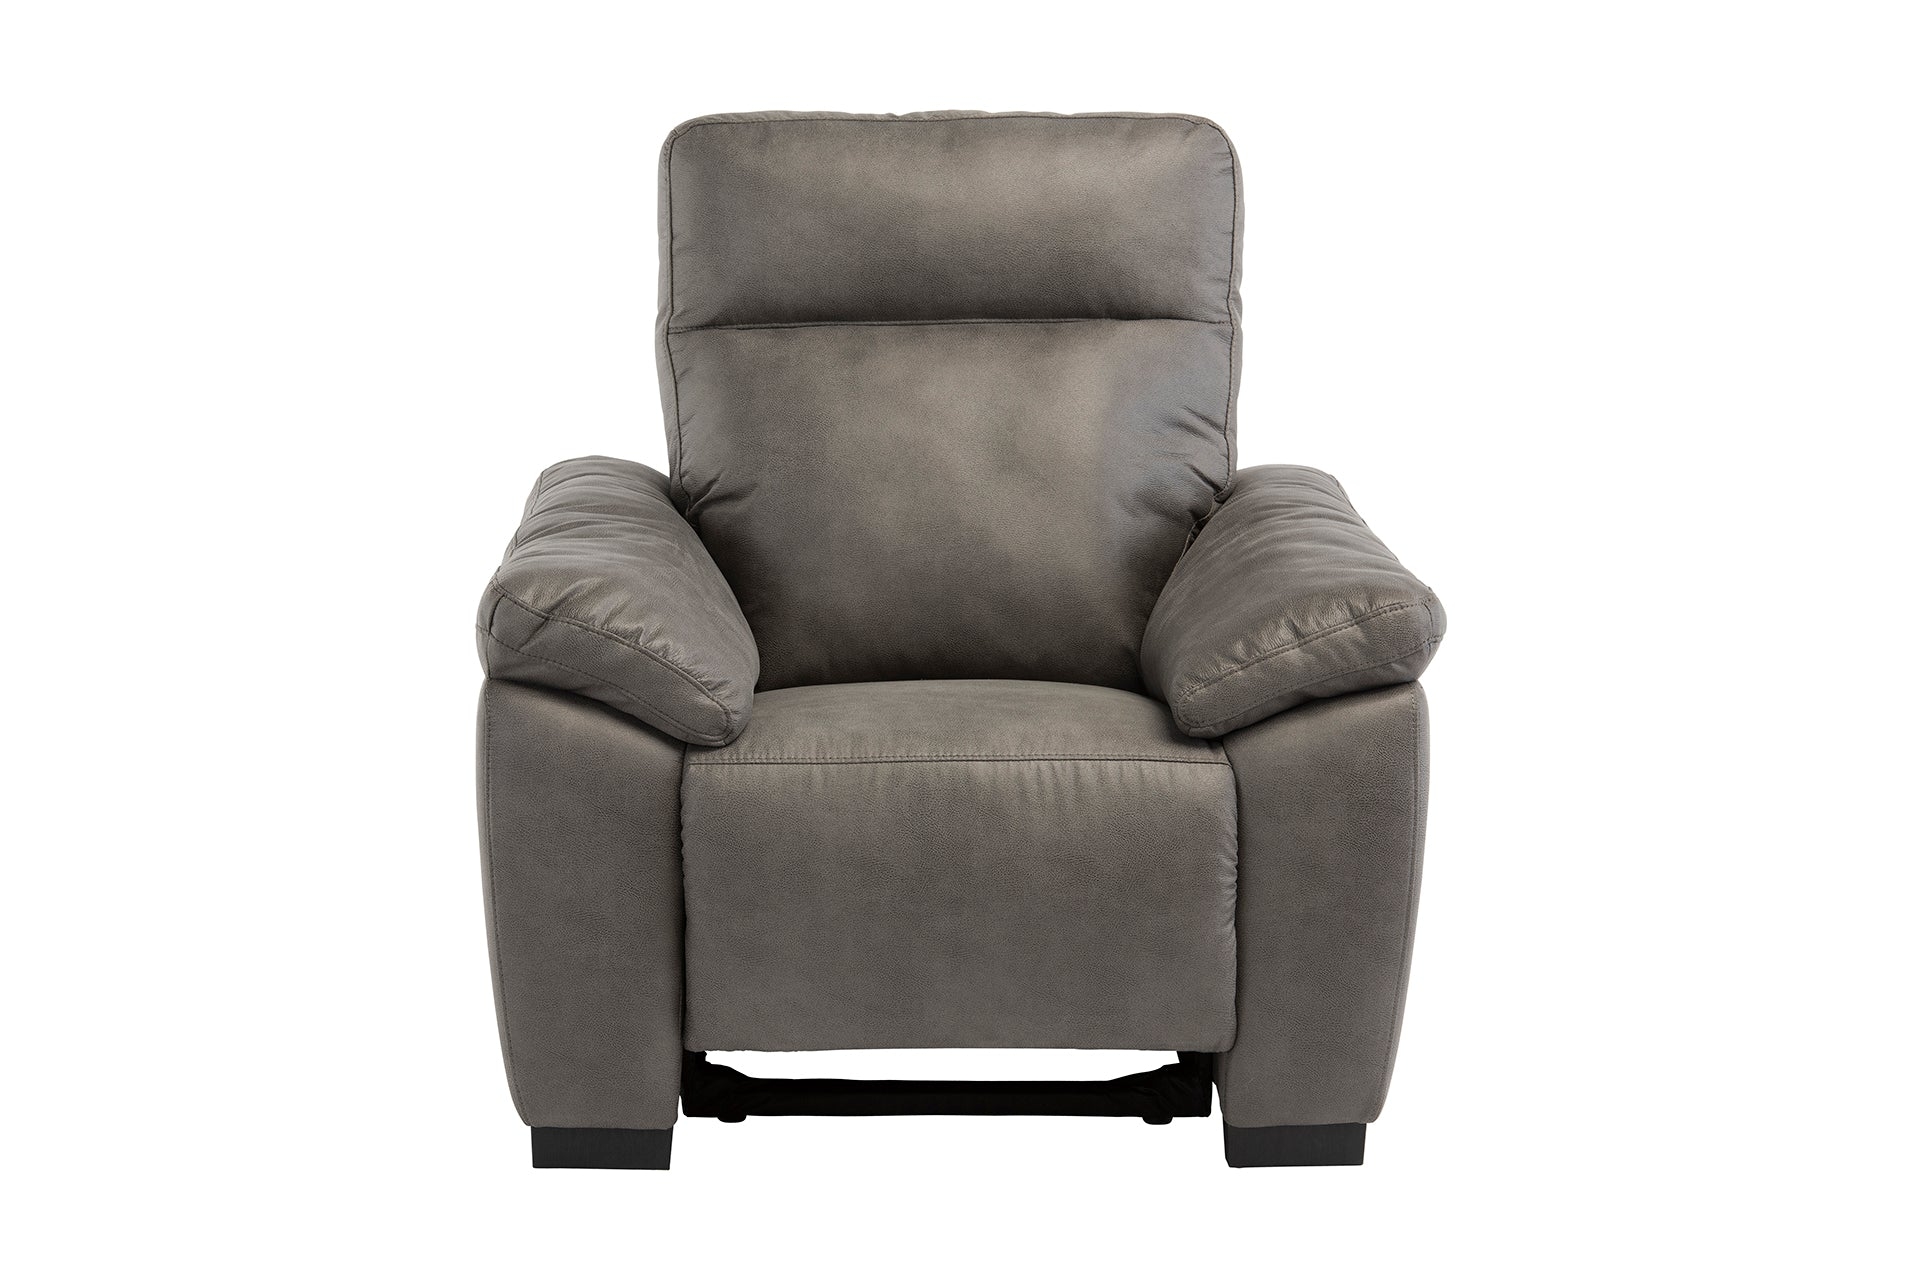 Farrell Full Electric Recliner In Soft Touch Fabric Armchair USB Port, Grey – Lc Living